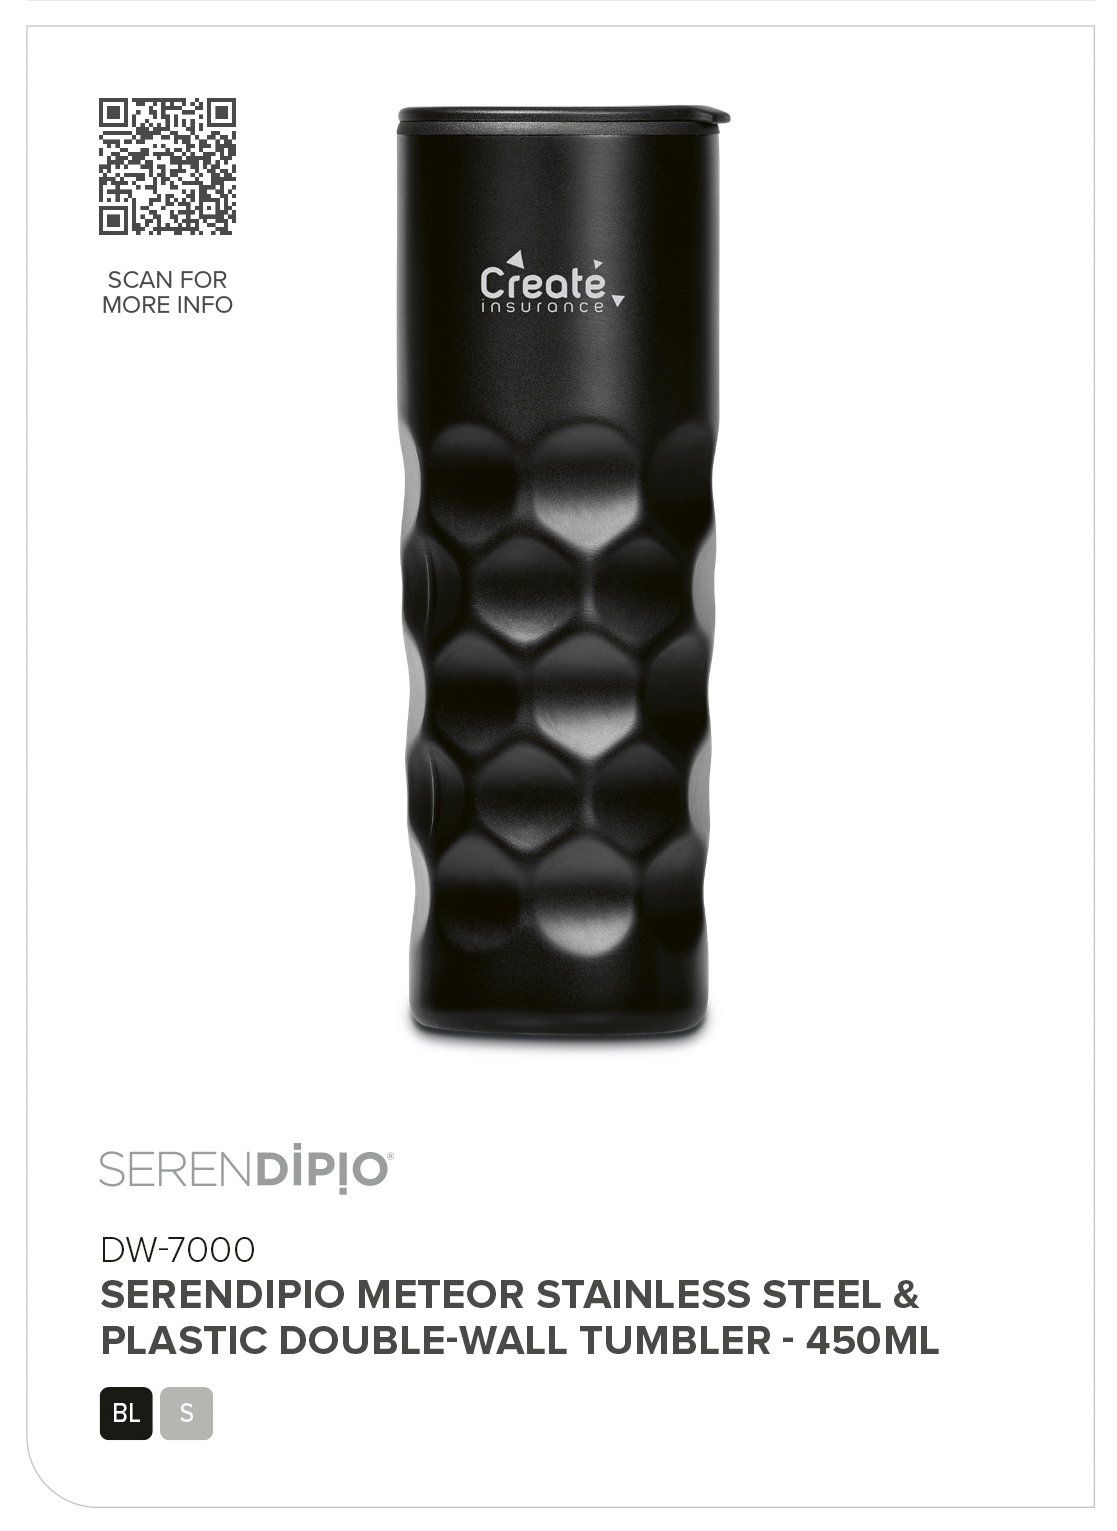 DW-7000 - Serendipio Meteor Stainless Steel & Plastic Double-Wall Tumbler - 450ml - Catalogue Image